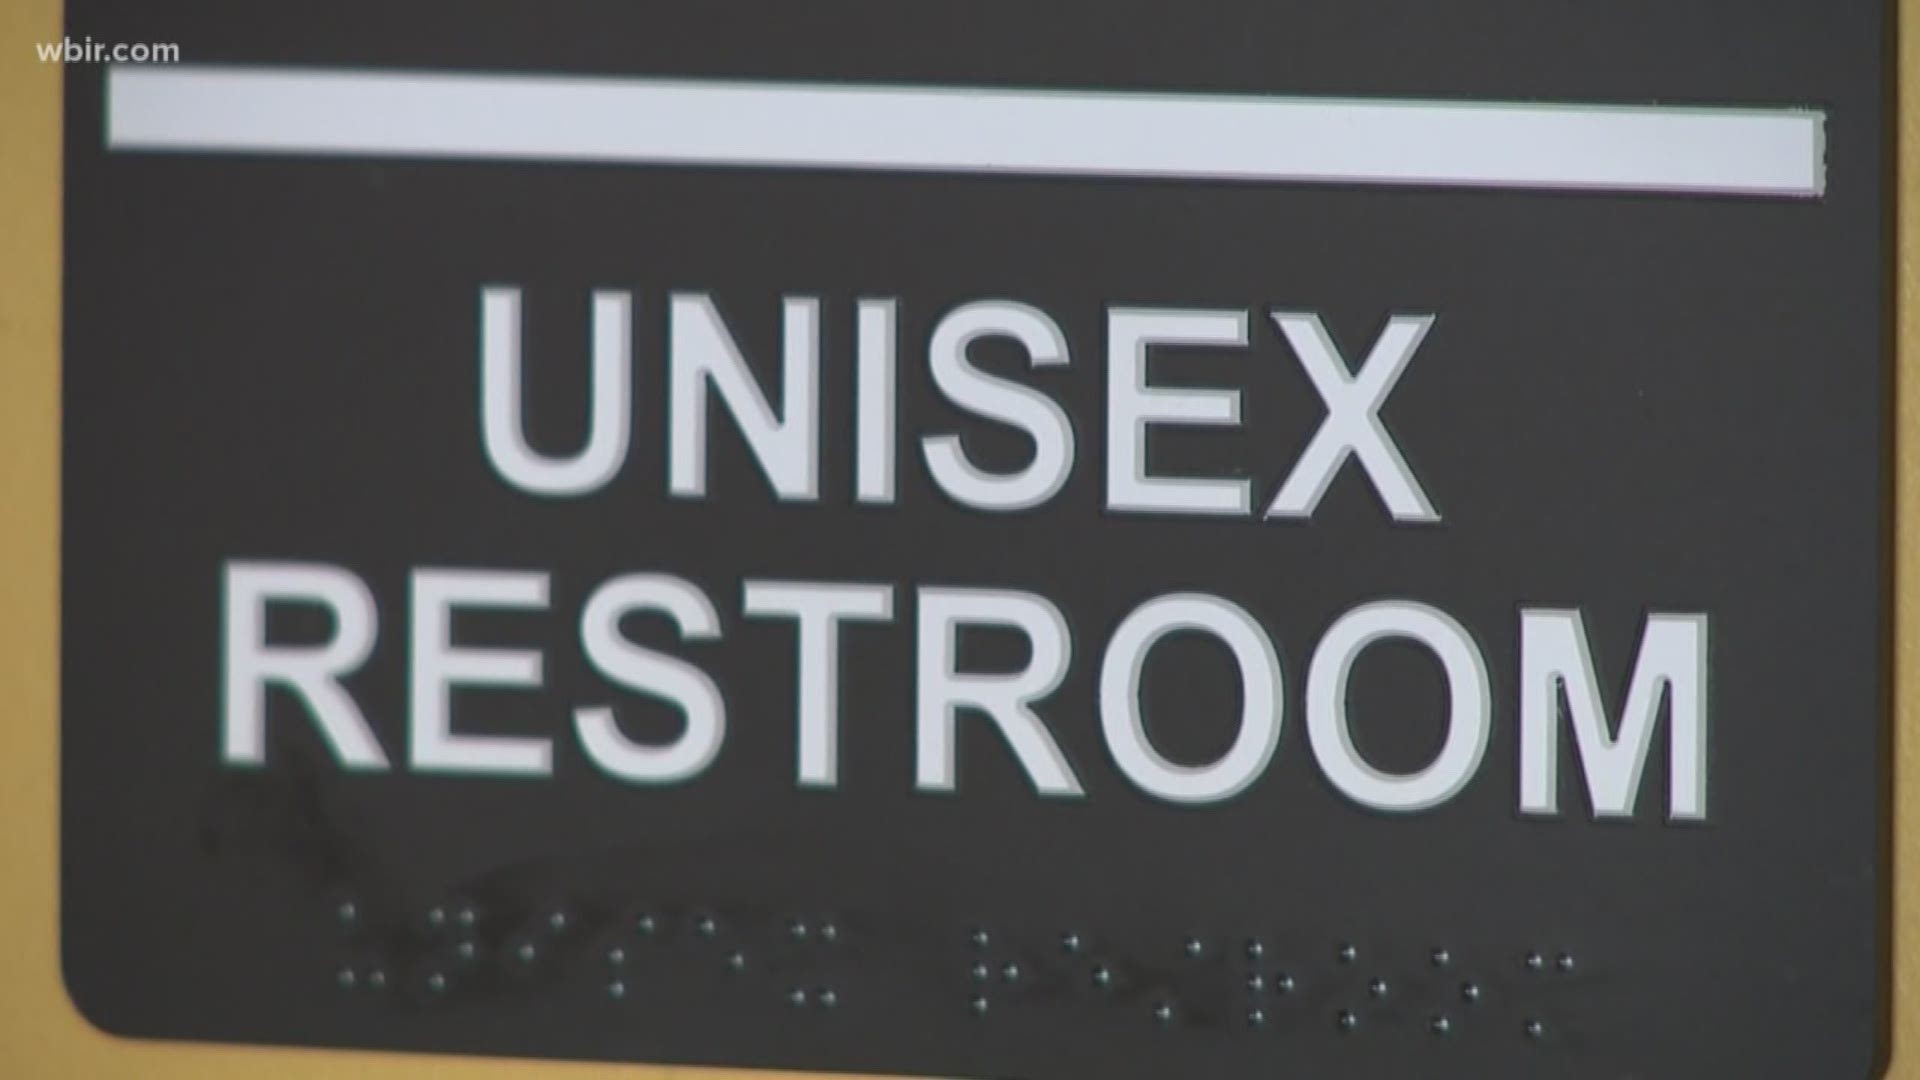 Tennessee lawmakers advanced a bill tied to public bathrooms.